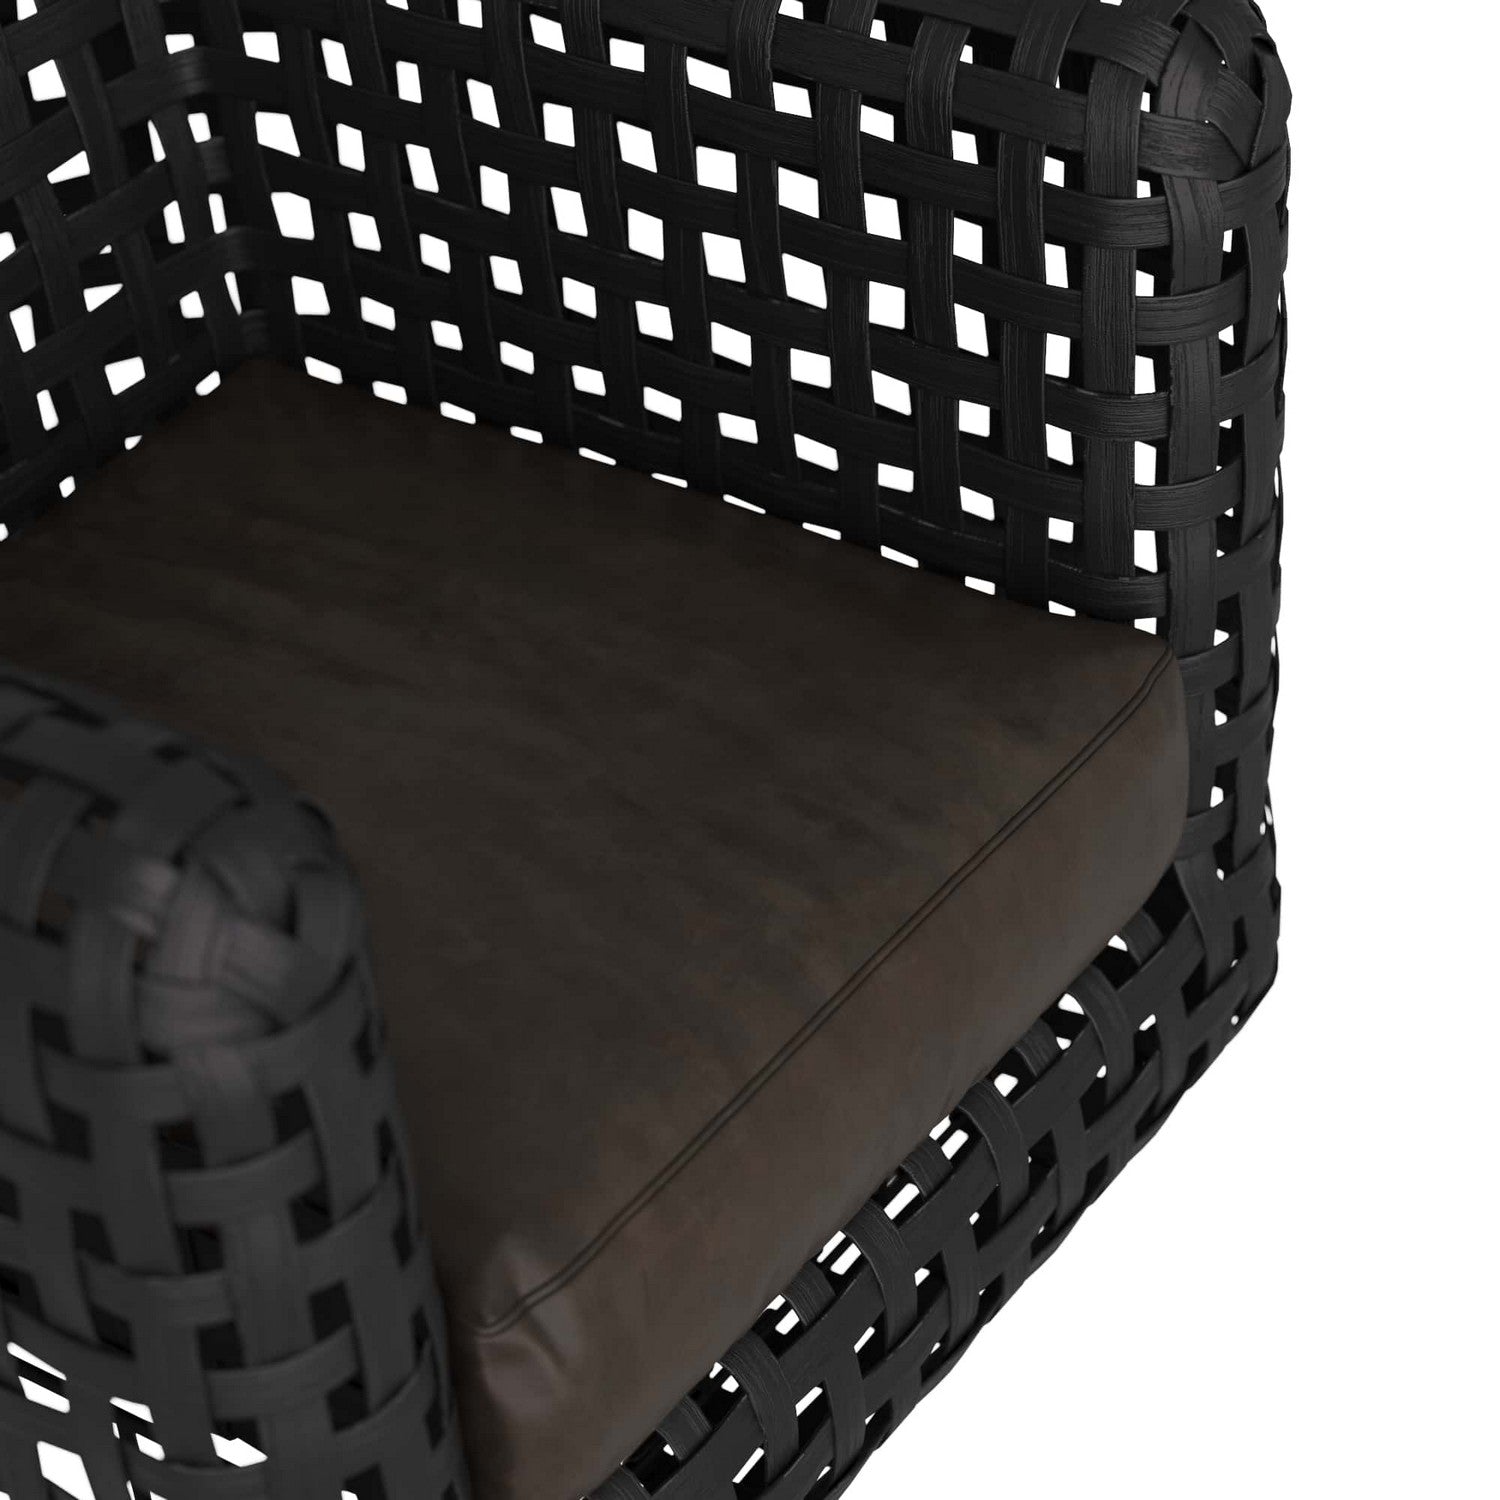 Chair from the Templar collection in Graphite finish